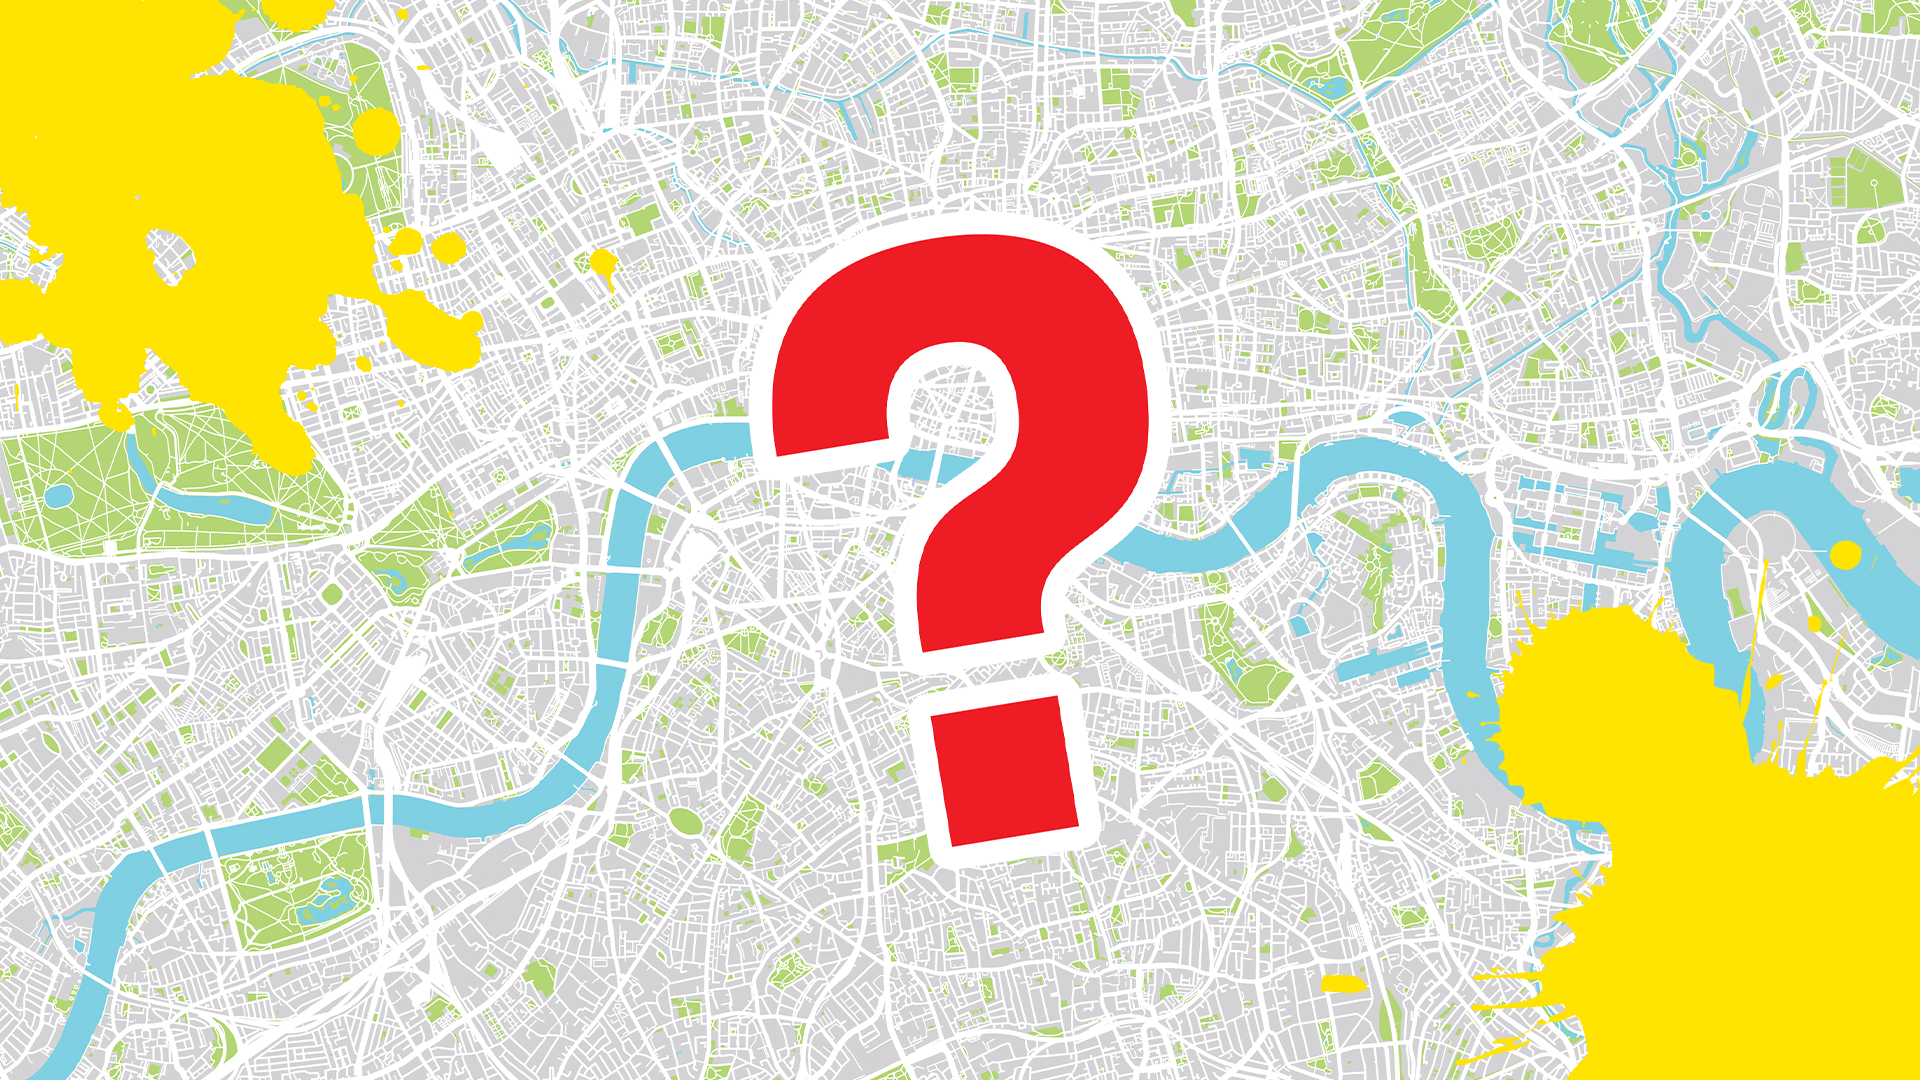 Map of Thames with splats and question mark